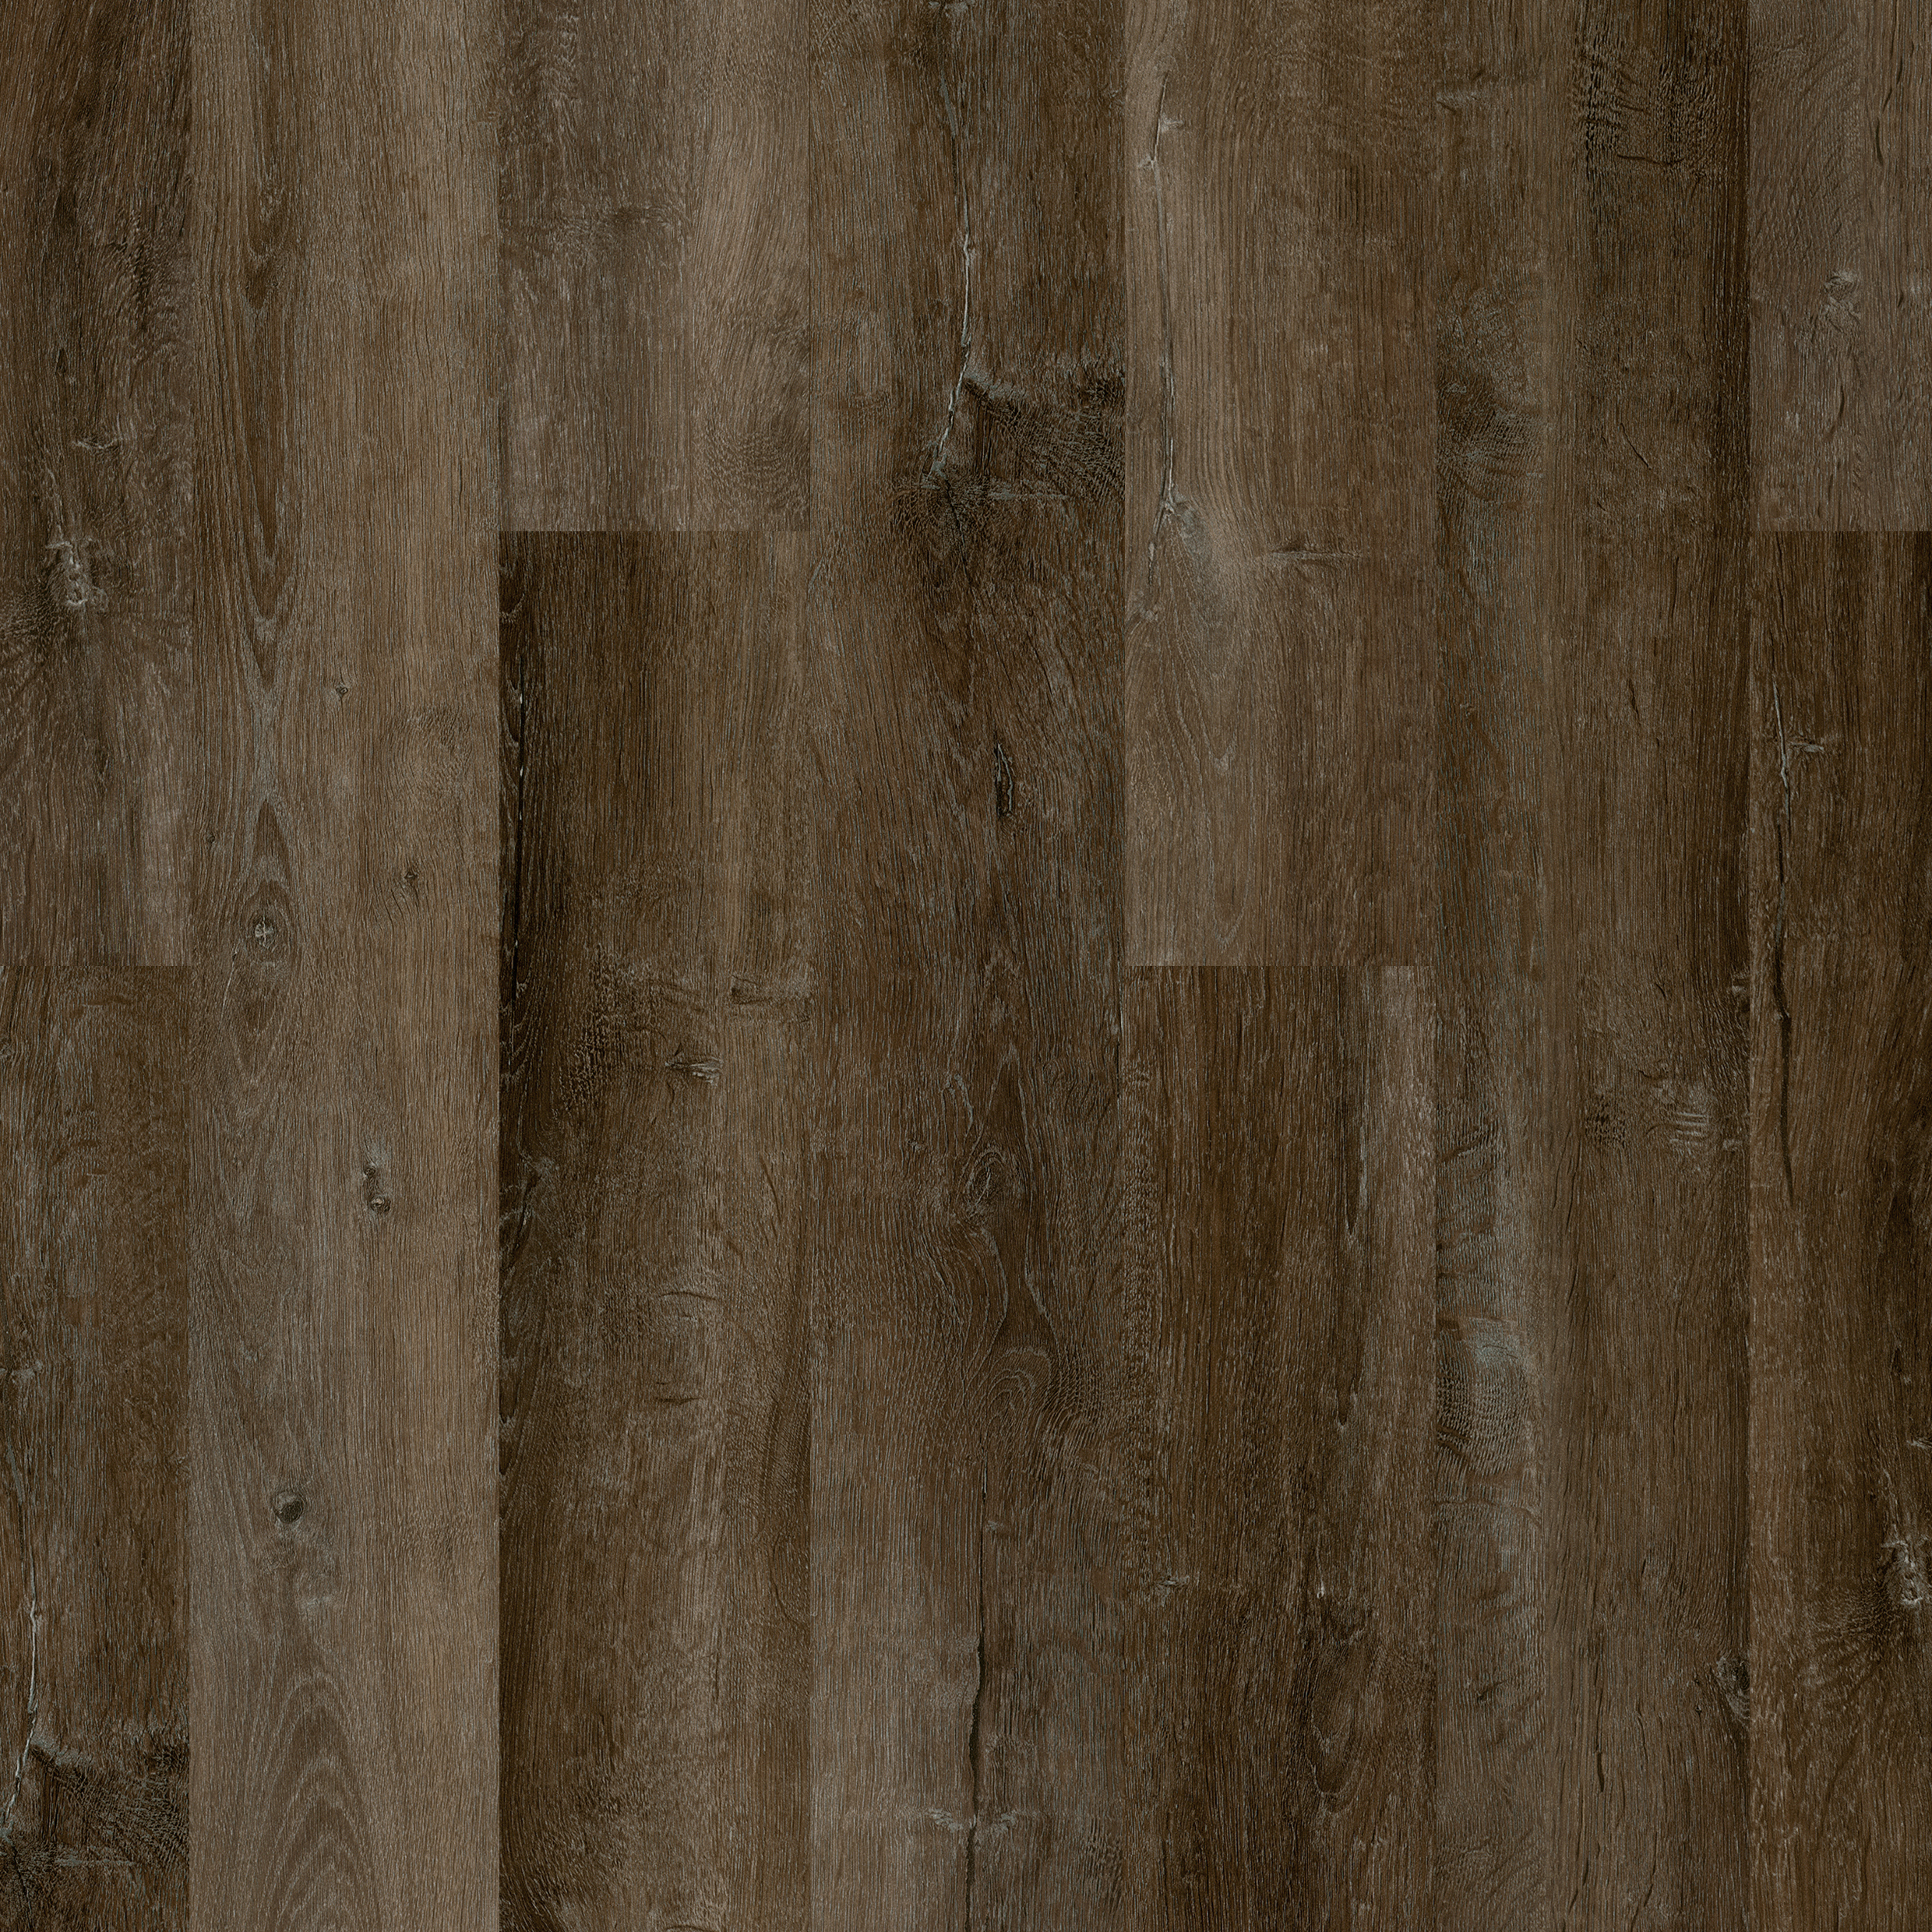 Image of Turner Rich Walnut Brown SPC Flooring with Integrated Underlay - 2.167m2